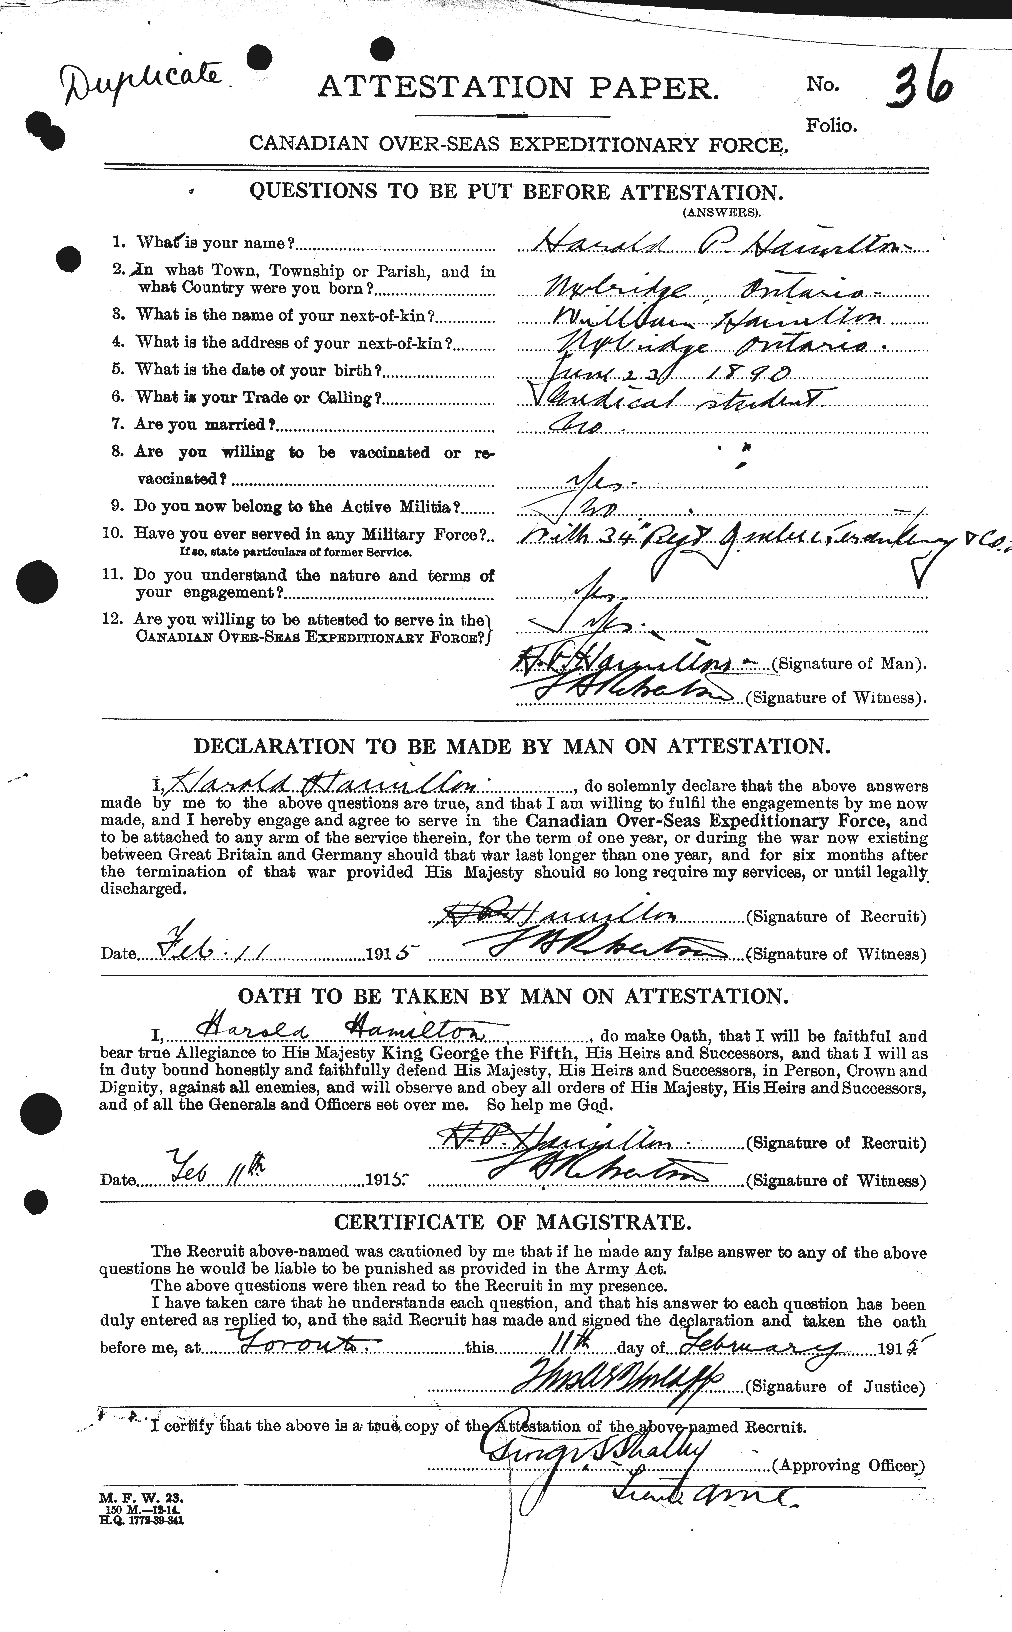 Personnel Records of the First World War - CEF 372499a